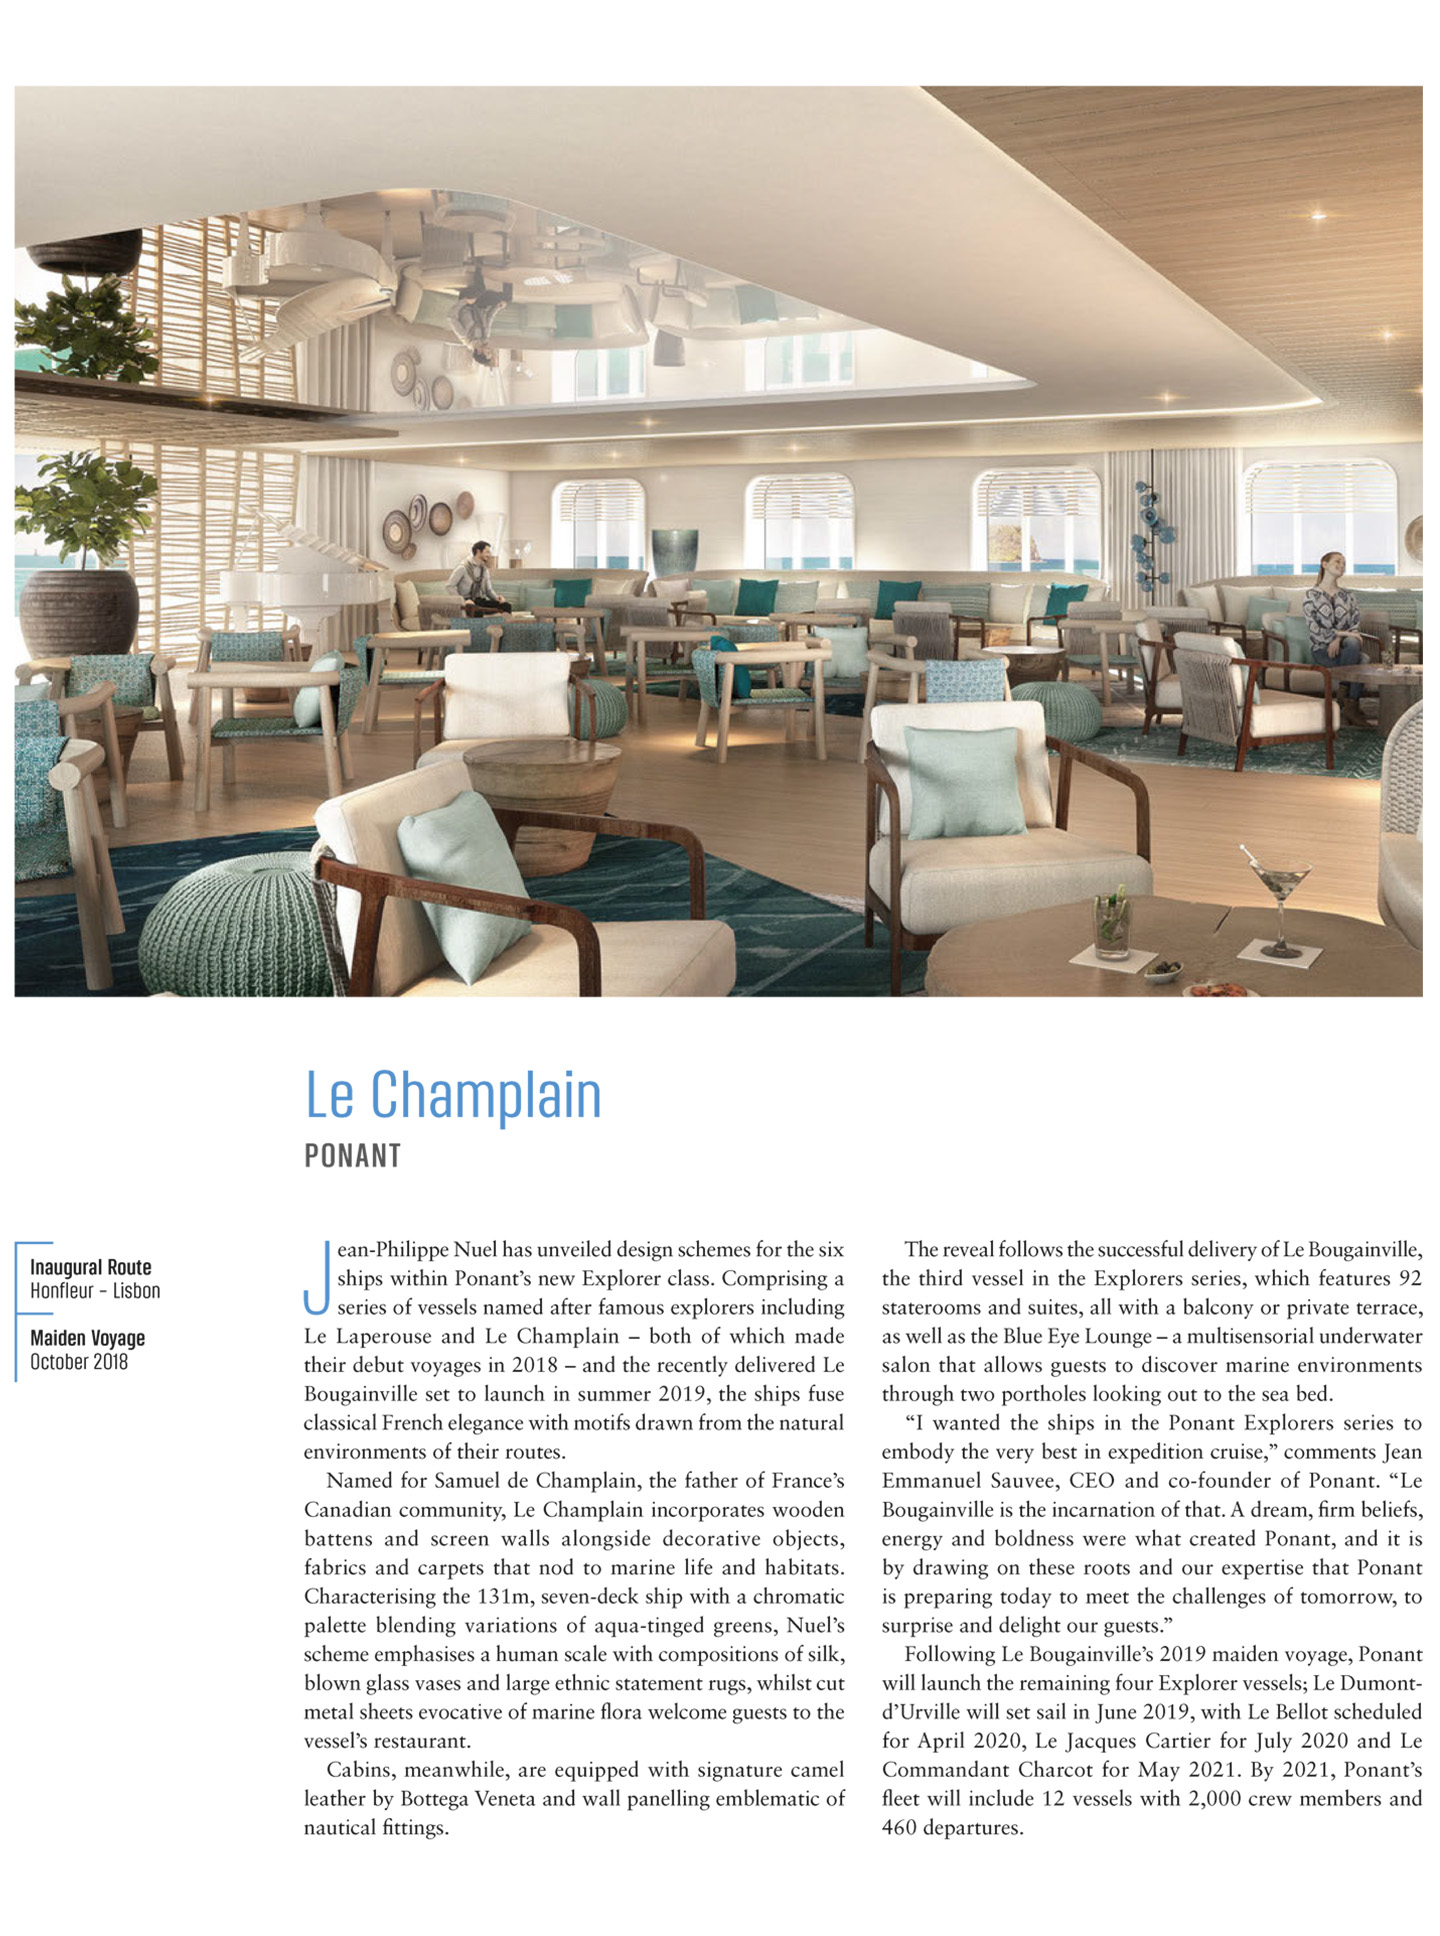 article on the ponant's champlain, a luxury cruise ship designed by the interior design studio jean-philippe nuel